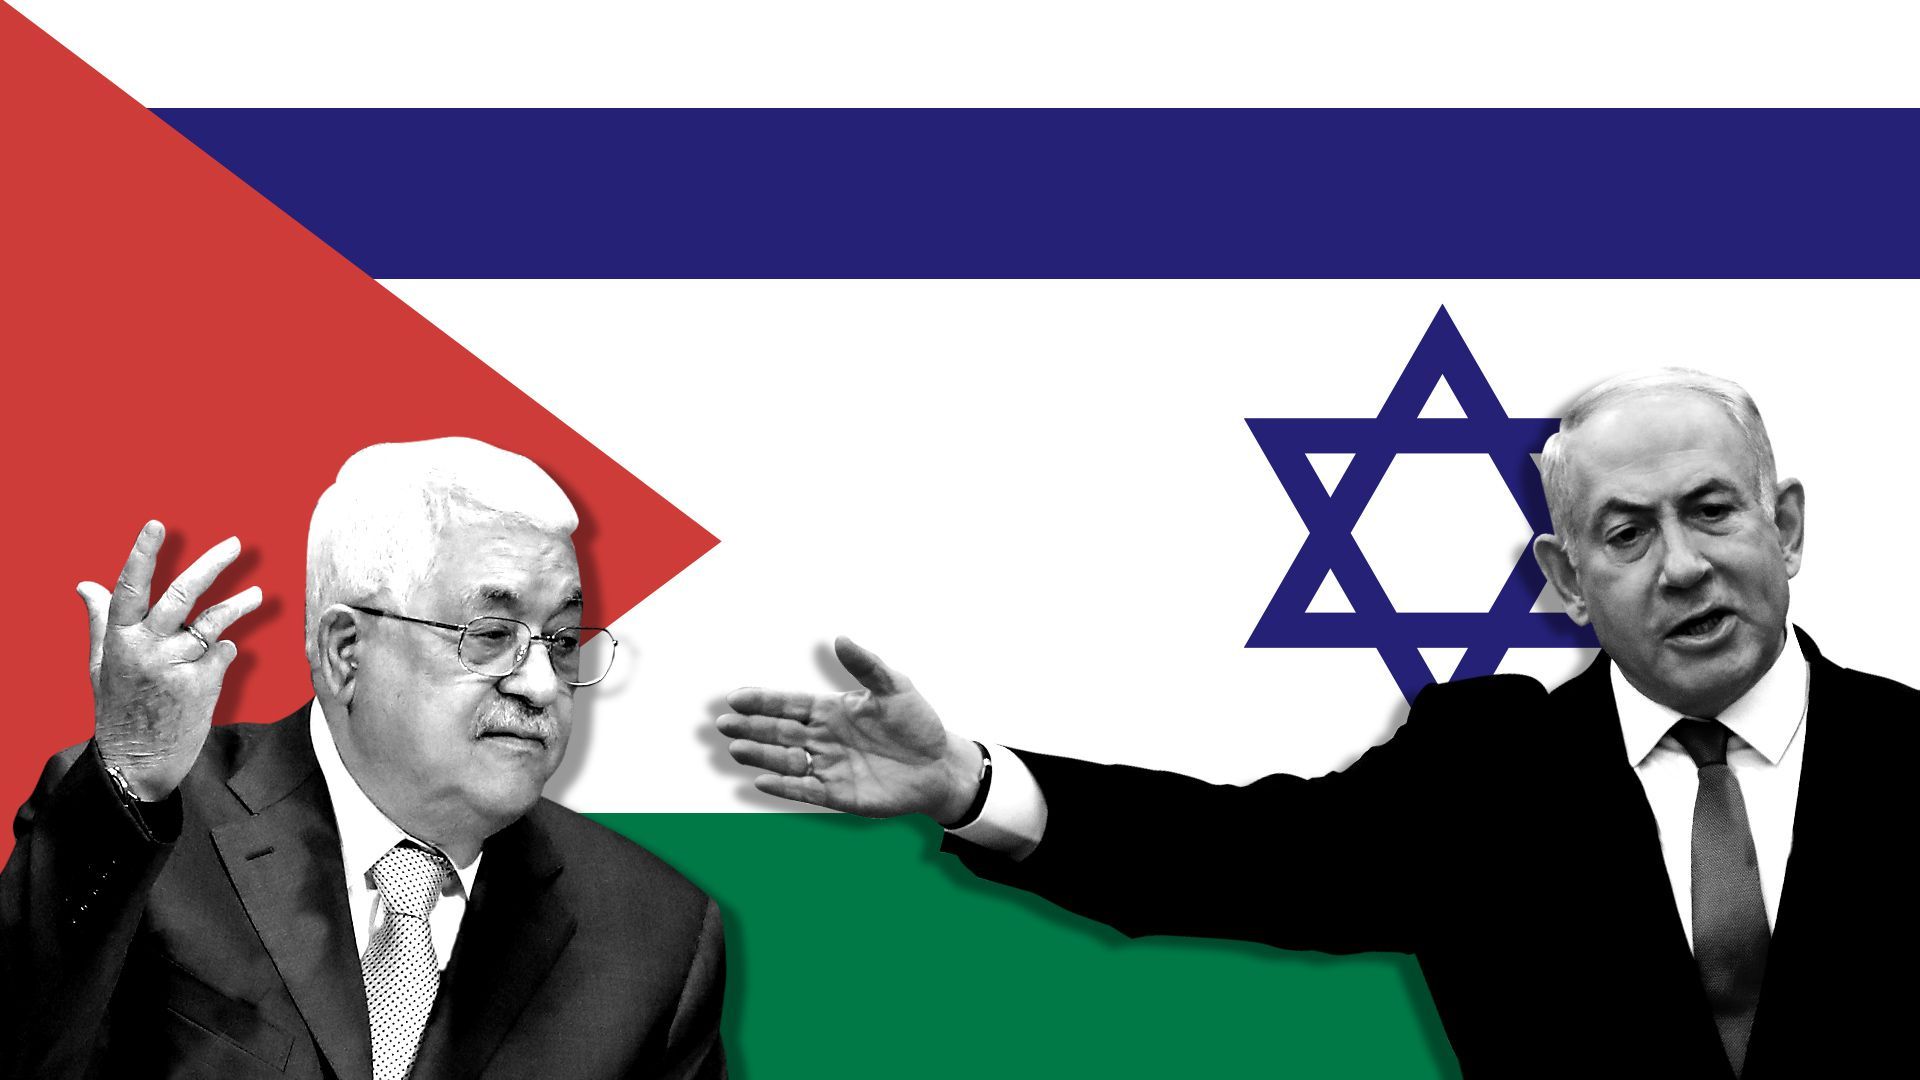 Photo illustration of Mahmoud Abbas and Benjamin Netanyahu in front of a mash-up of the Palestinian and Israeli flags.